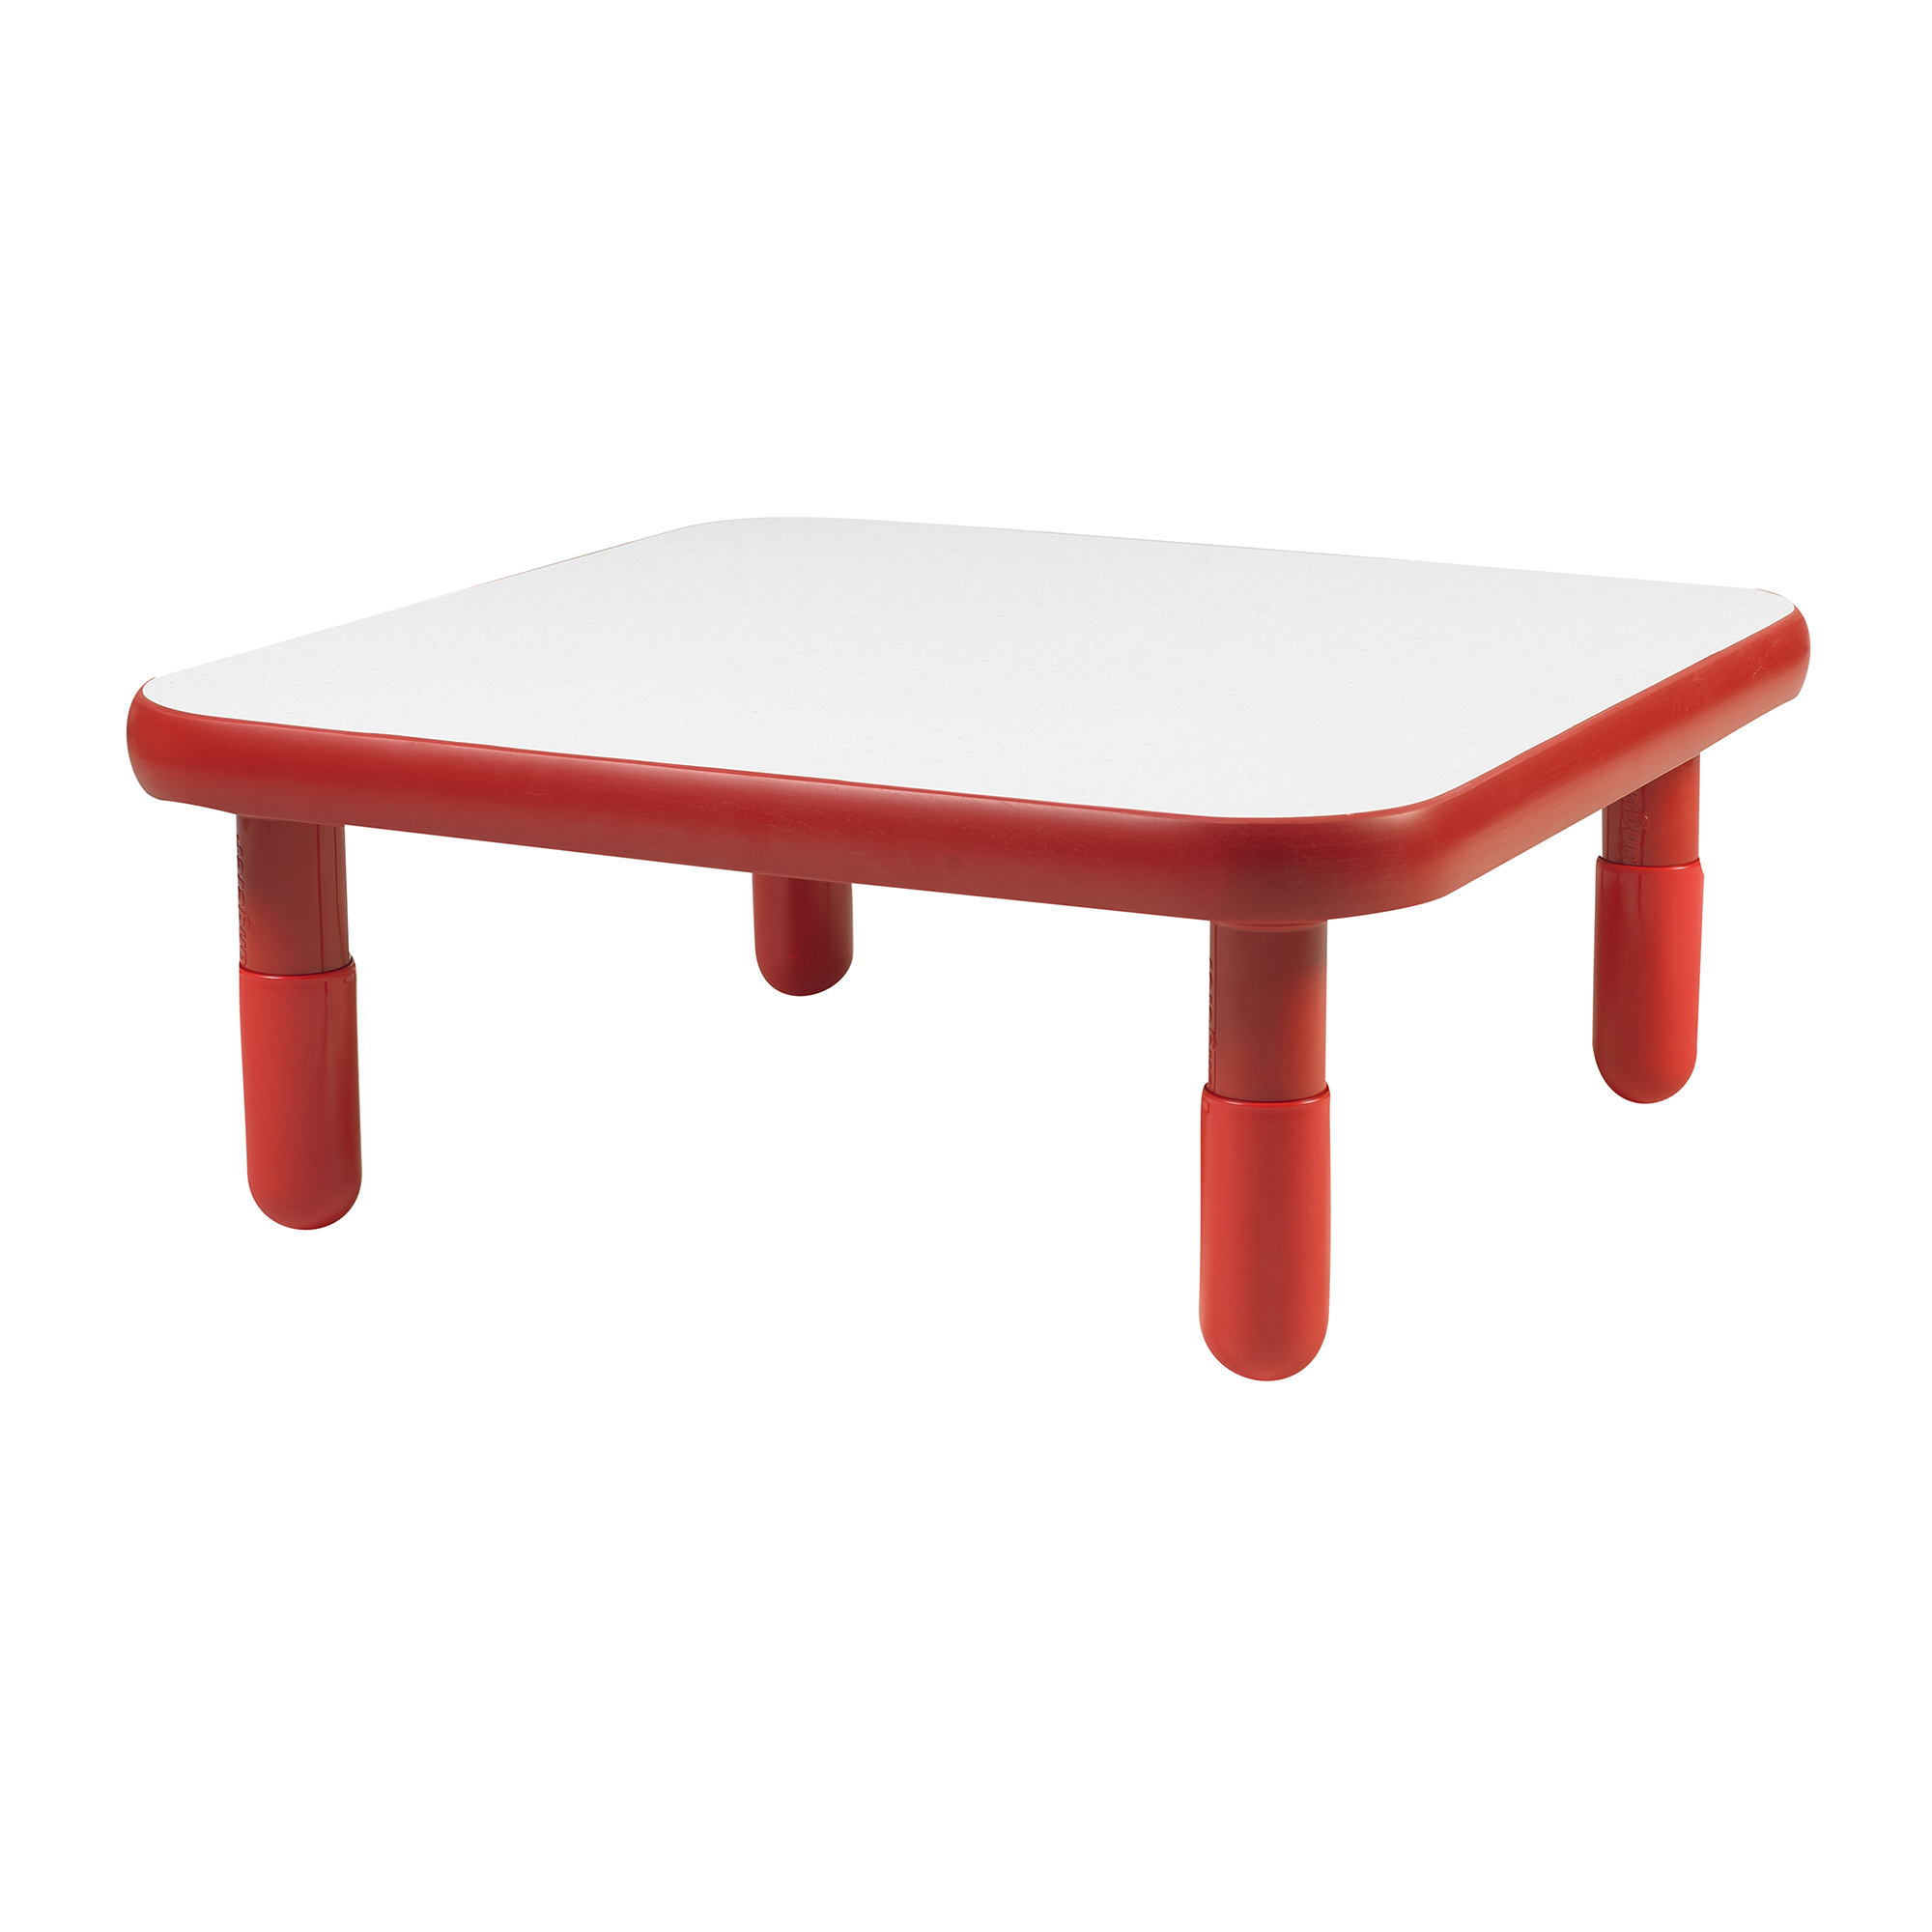 BaseLine® 76 cm  Square Table - Candy Apple Red with 30,5 cm  Legs